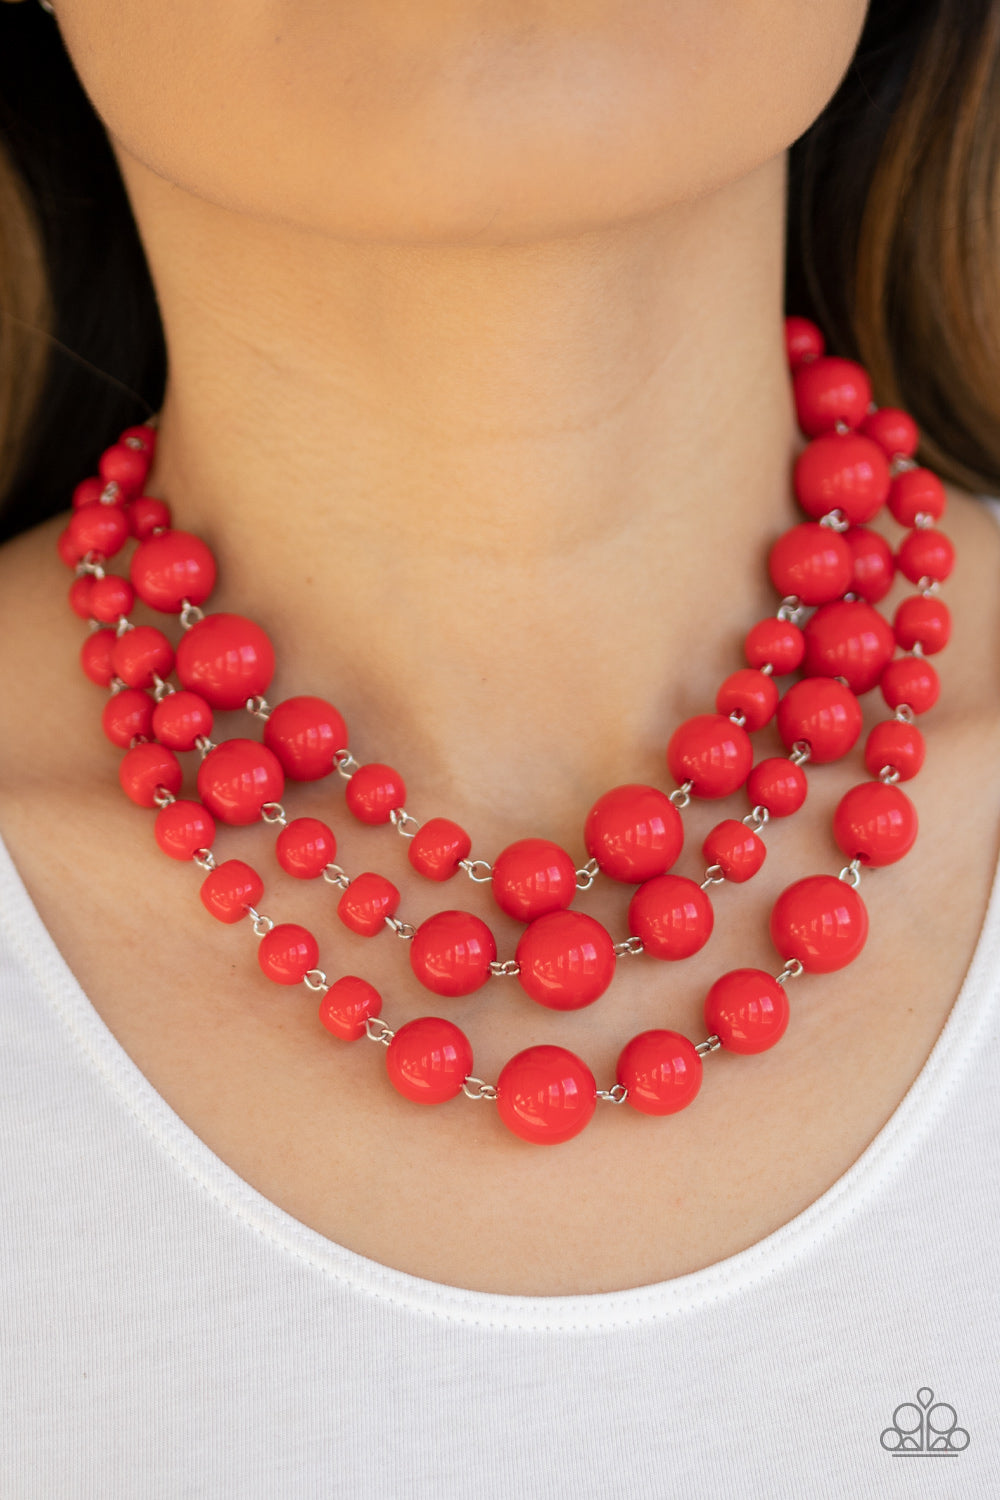 ~Paparazzi~ Everyone Scattered Red Bead Necklace Set